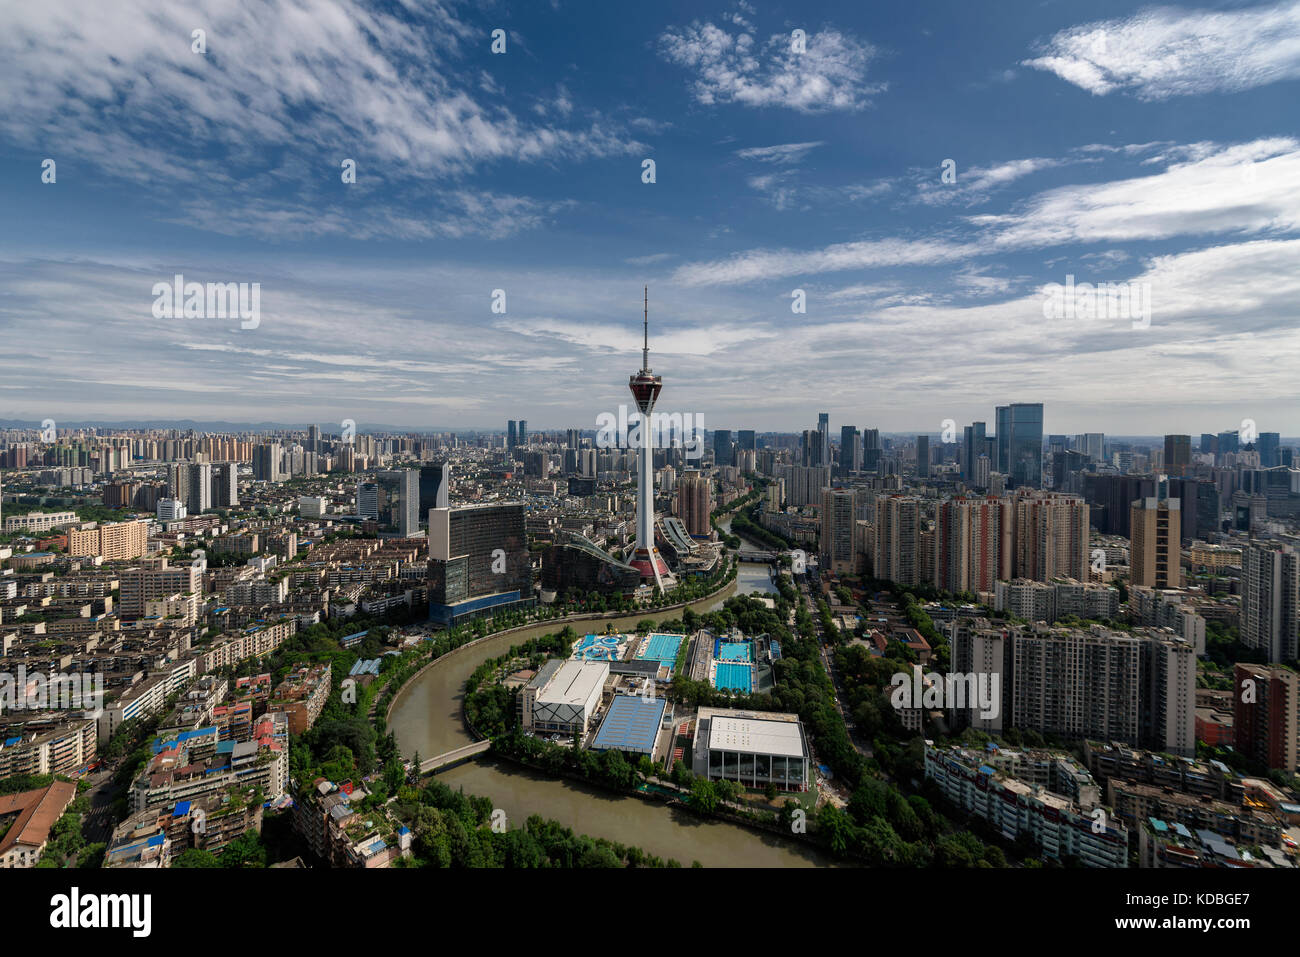 Chengdu, Sichuan Province, China - July 6, 2017: Sichuan TV tower and downtown skyline in daylight Stock Photo